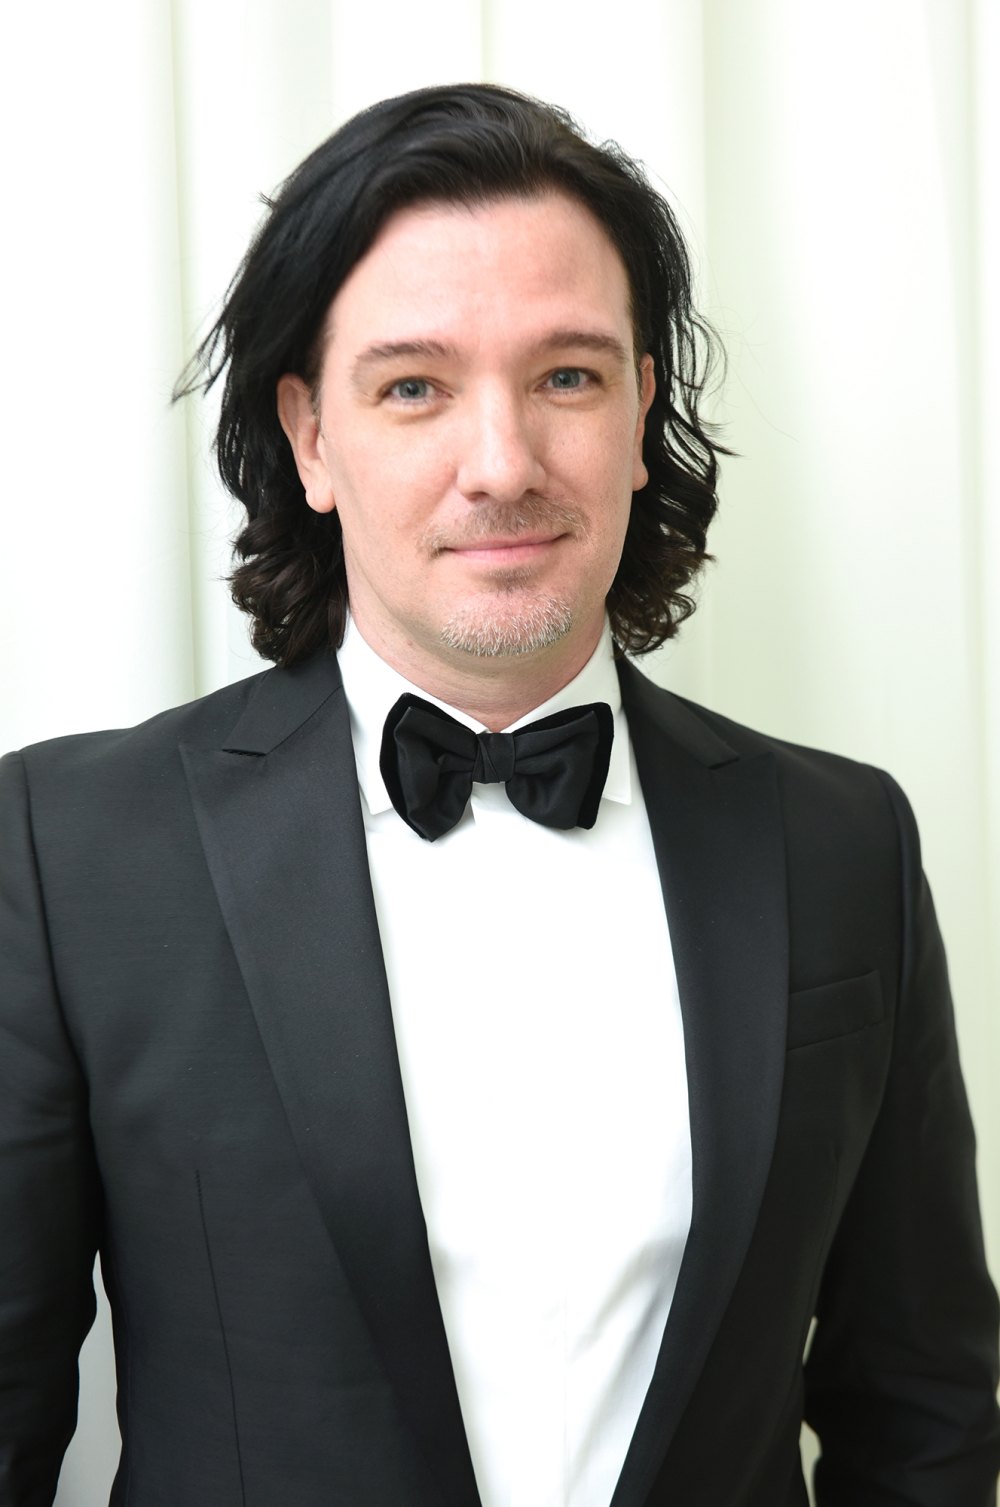 JC Chasez' Shares His Favorite Holiday Traditions